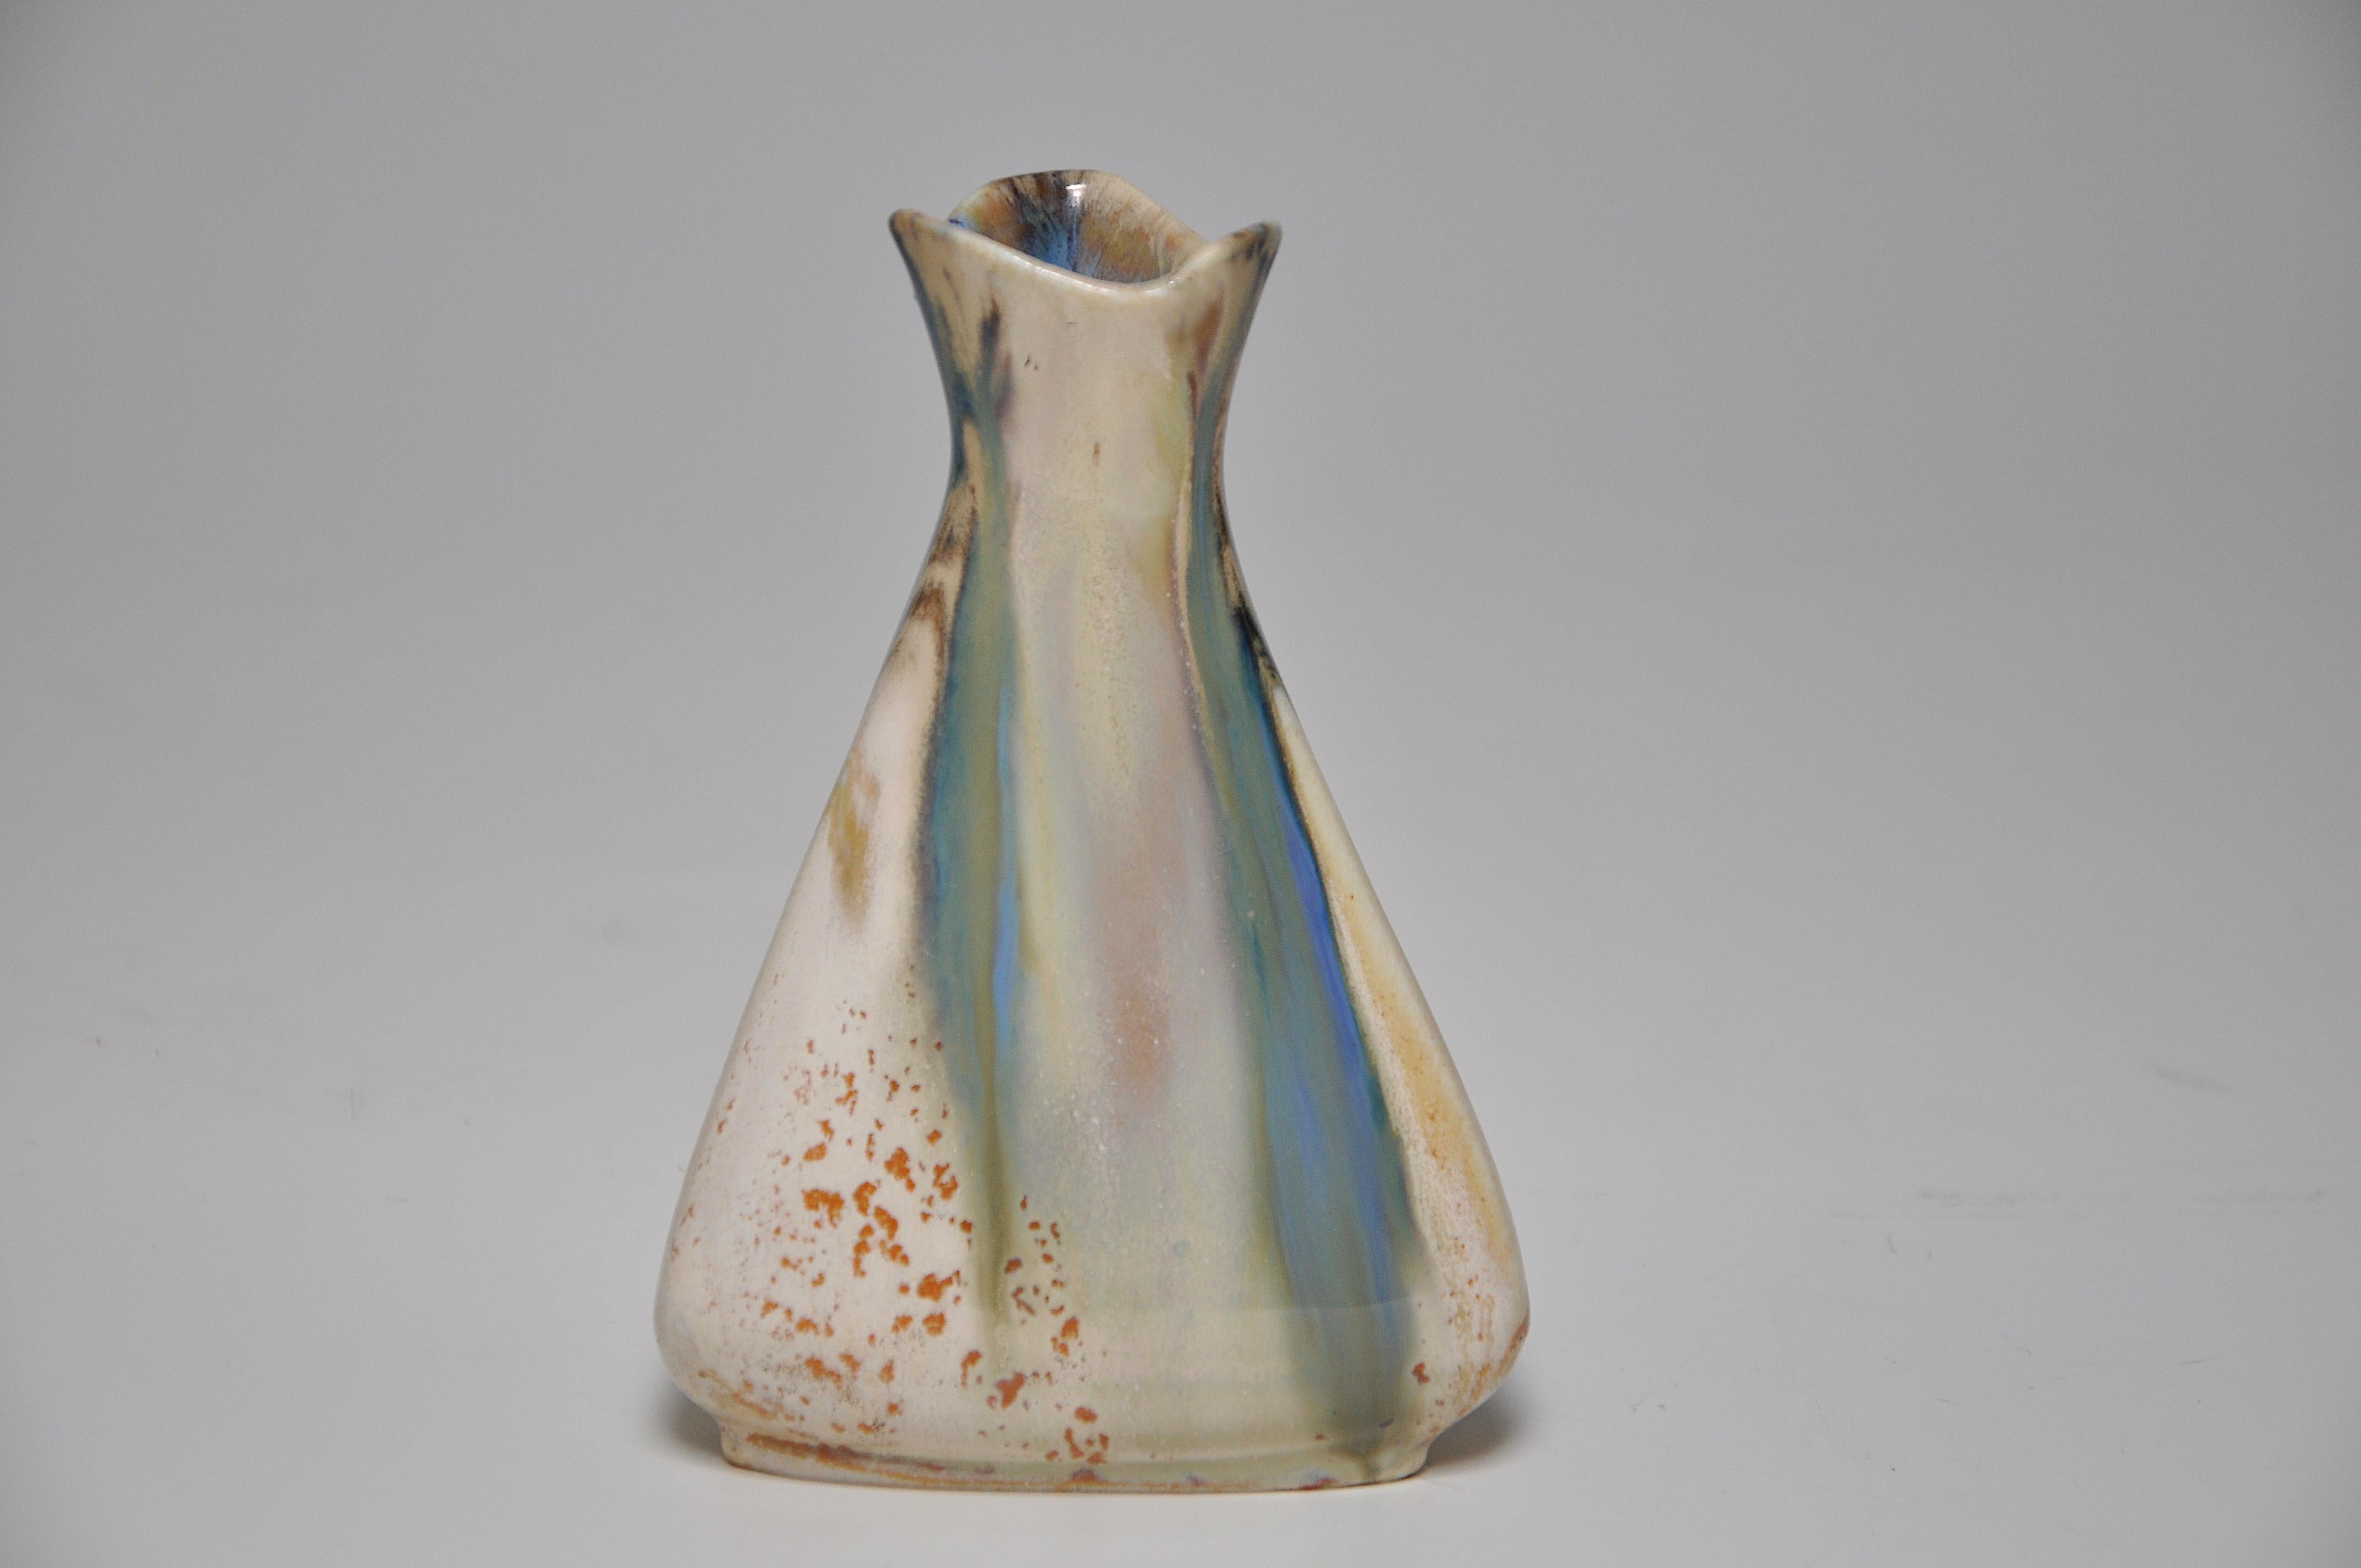 A perfect example of a small stoneware vase of Japoniste inspiration, triangular in form with an flared top, and covered with a flowing cream, green, and blue flame glaze, flecked with brown. By the French art ceramist Jean Longlade (1879-1928) of